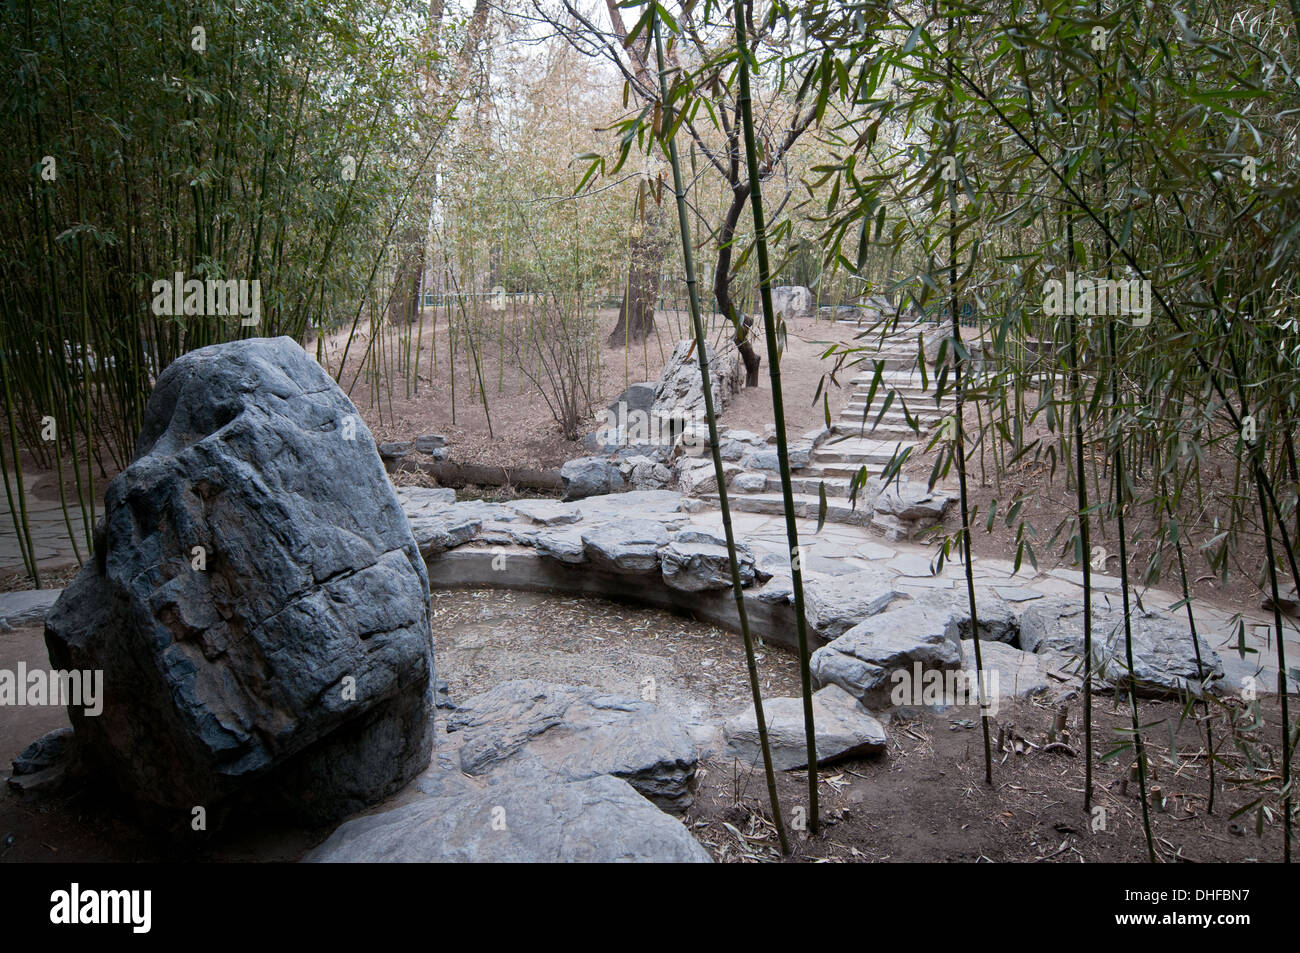 Zizhuyuan Park commonly known as Purple or Black Bamboo Park in Haidian District, Beijing, China Stock Photo